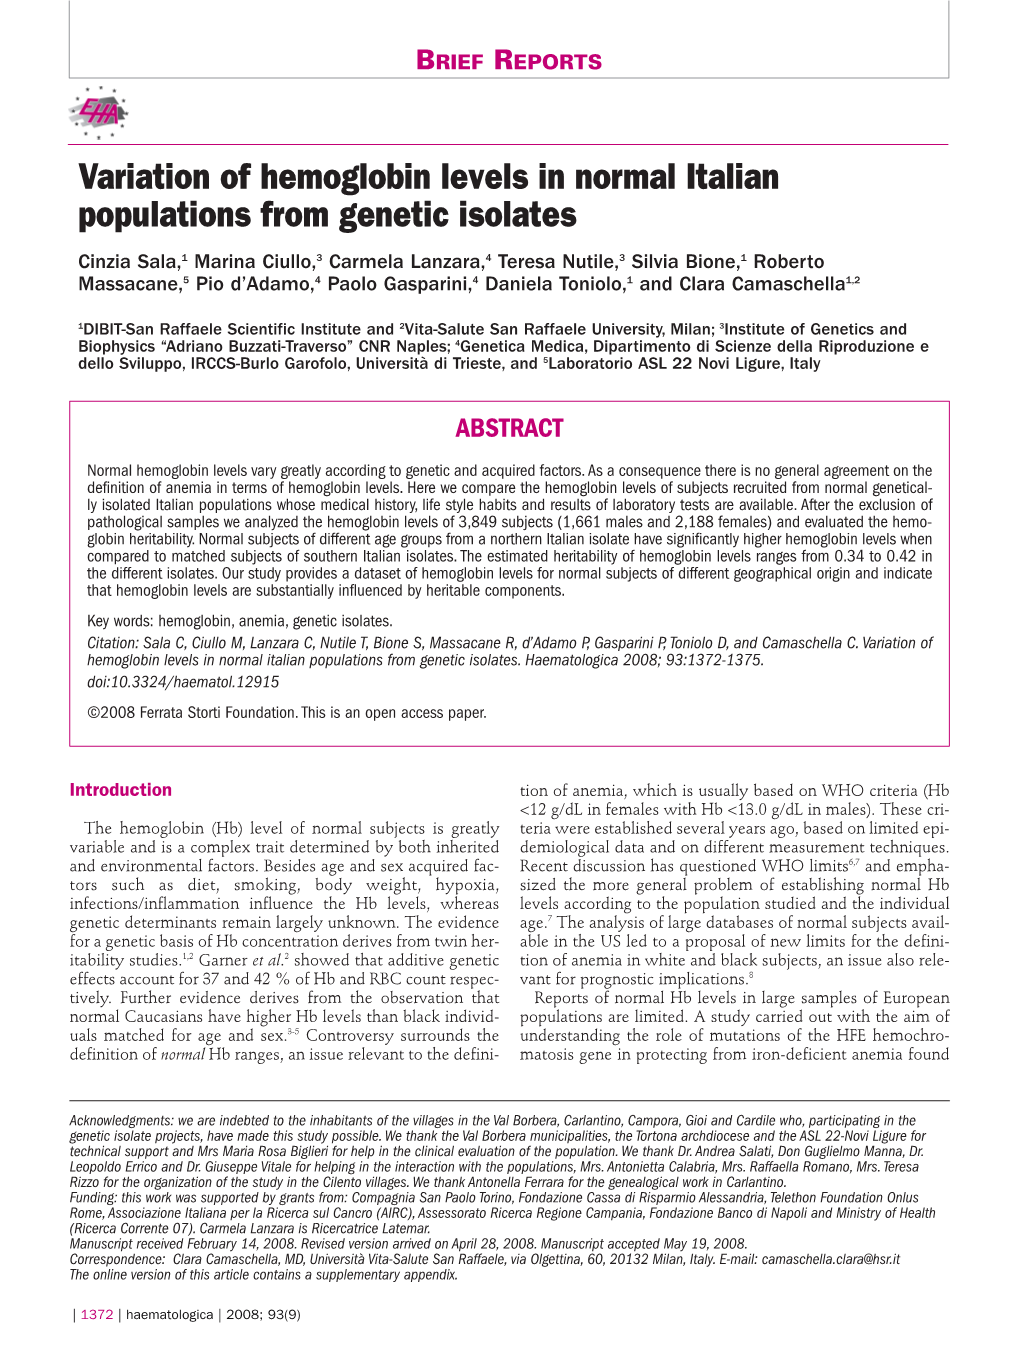 Variation of Hemoglobin Levels in Normal Italian Populations from Genetic Isolates